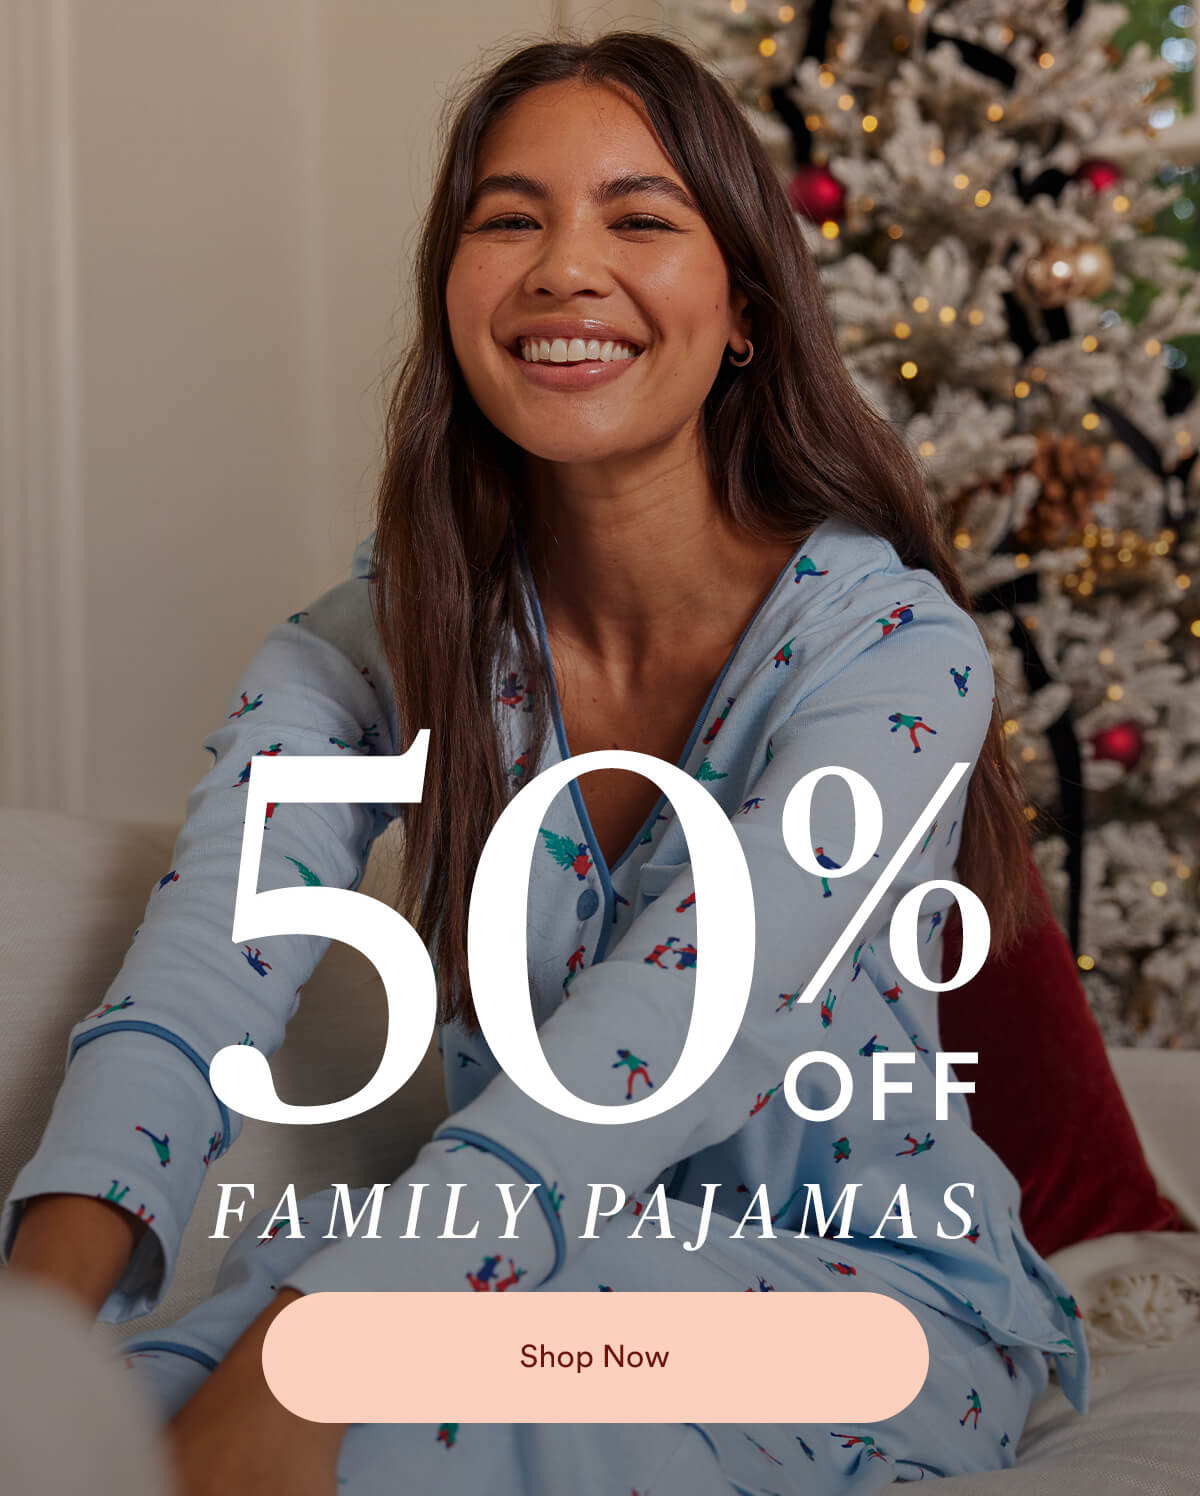 50% off Family Pajamas. Women smiling in front of Christmas tree wearing Summersalt Cotton Family Pajamas